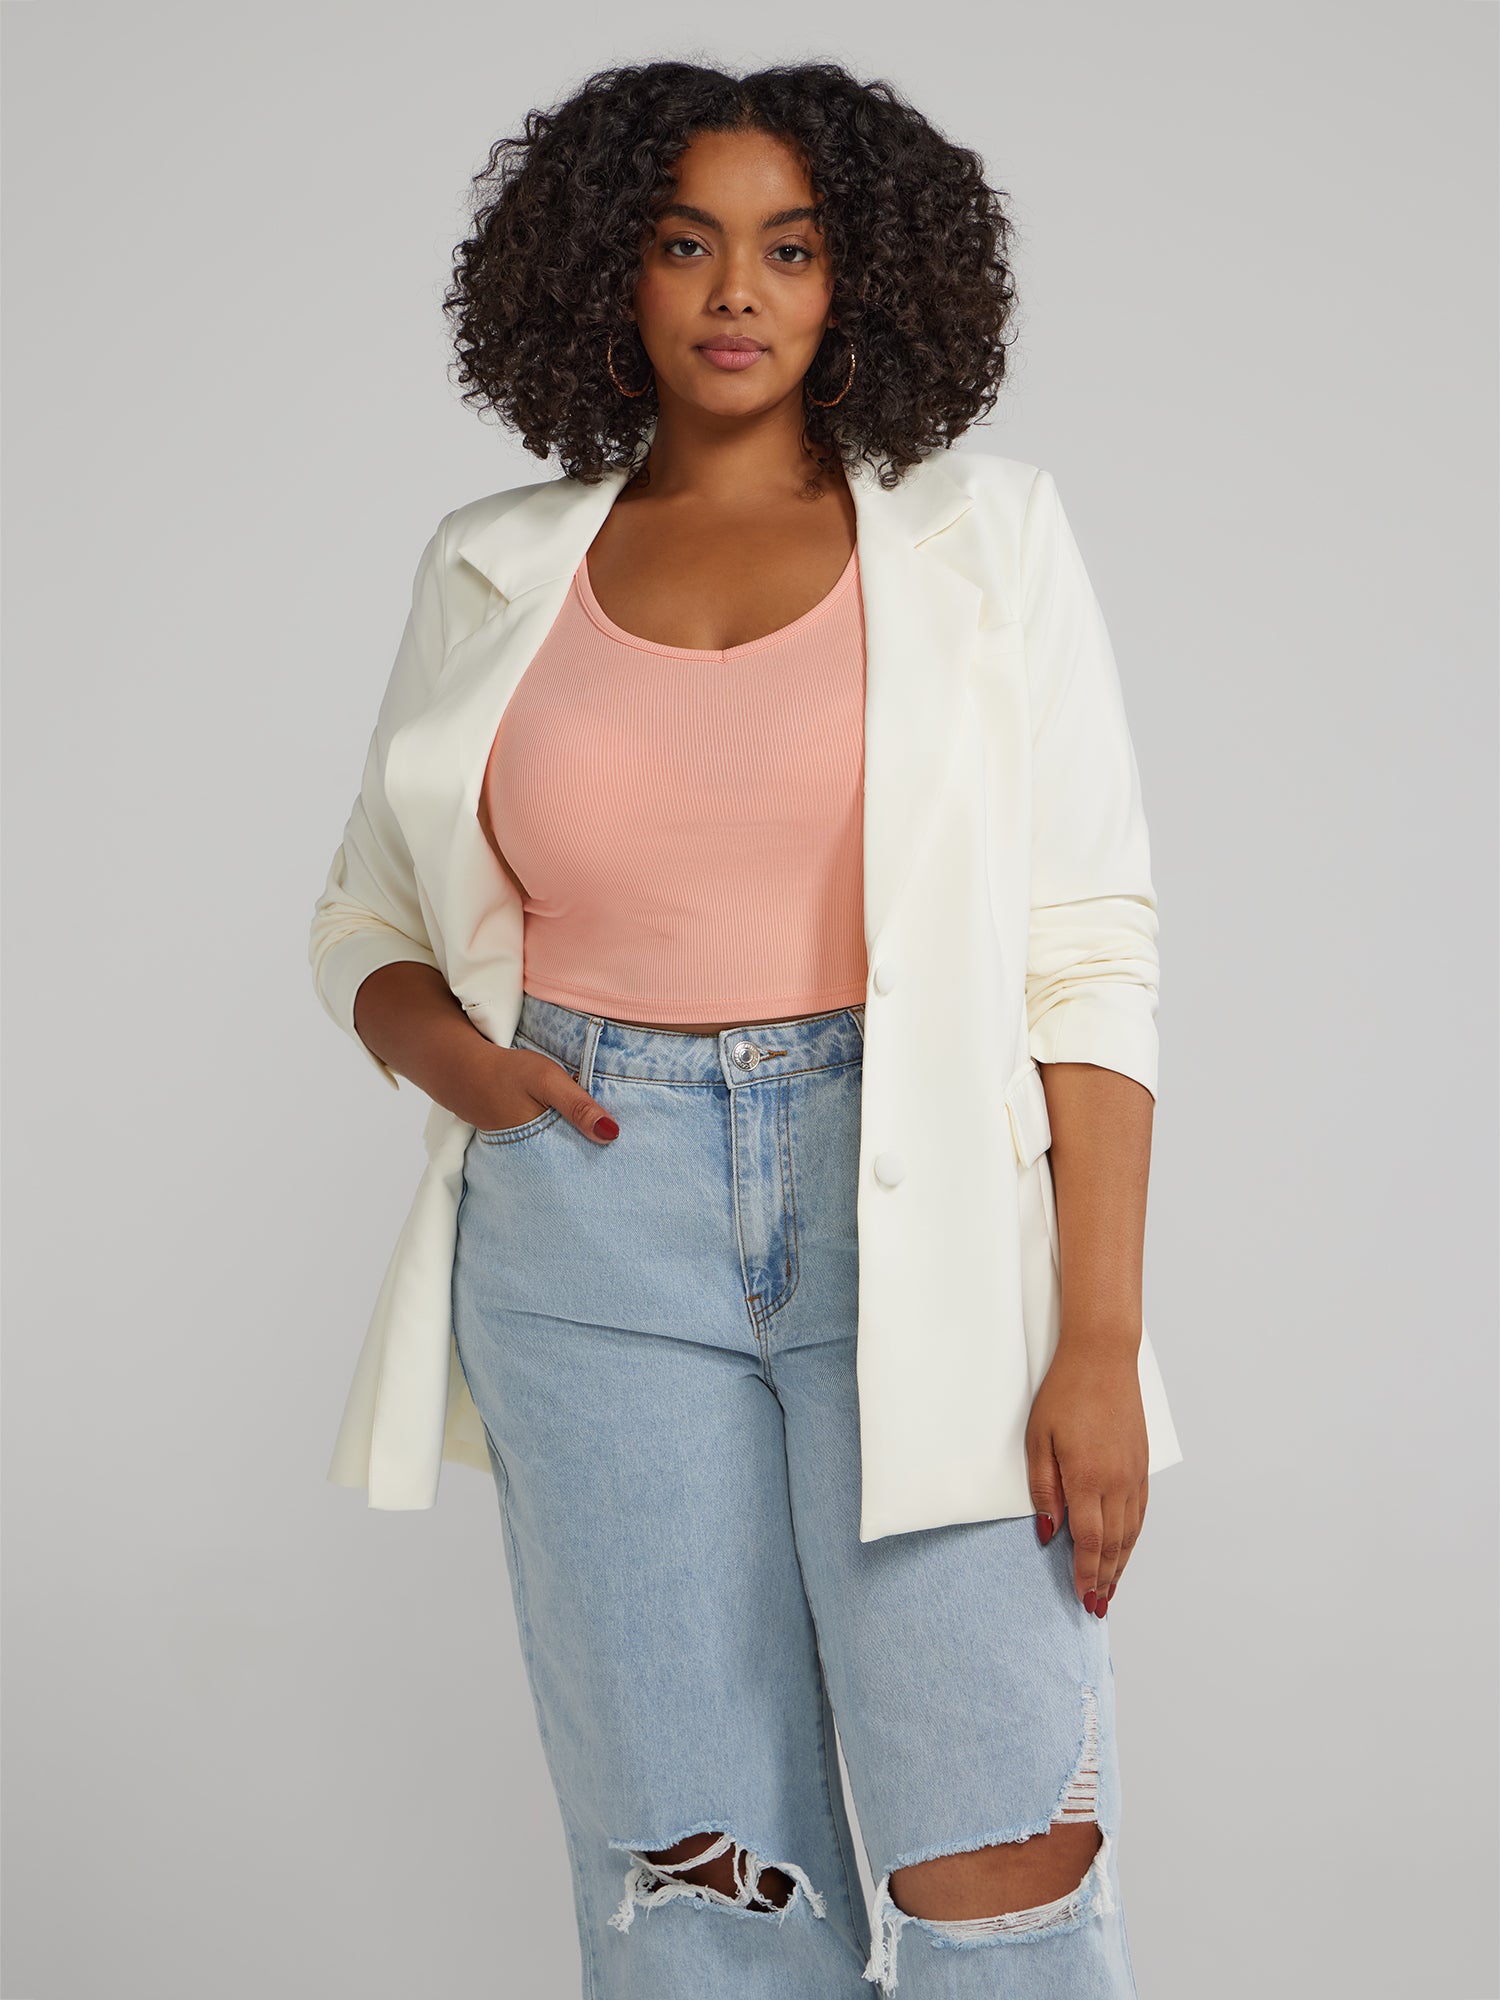 Fashion To Figure, Plus Size Clothing and Fashion for Women